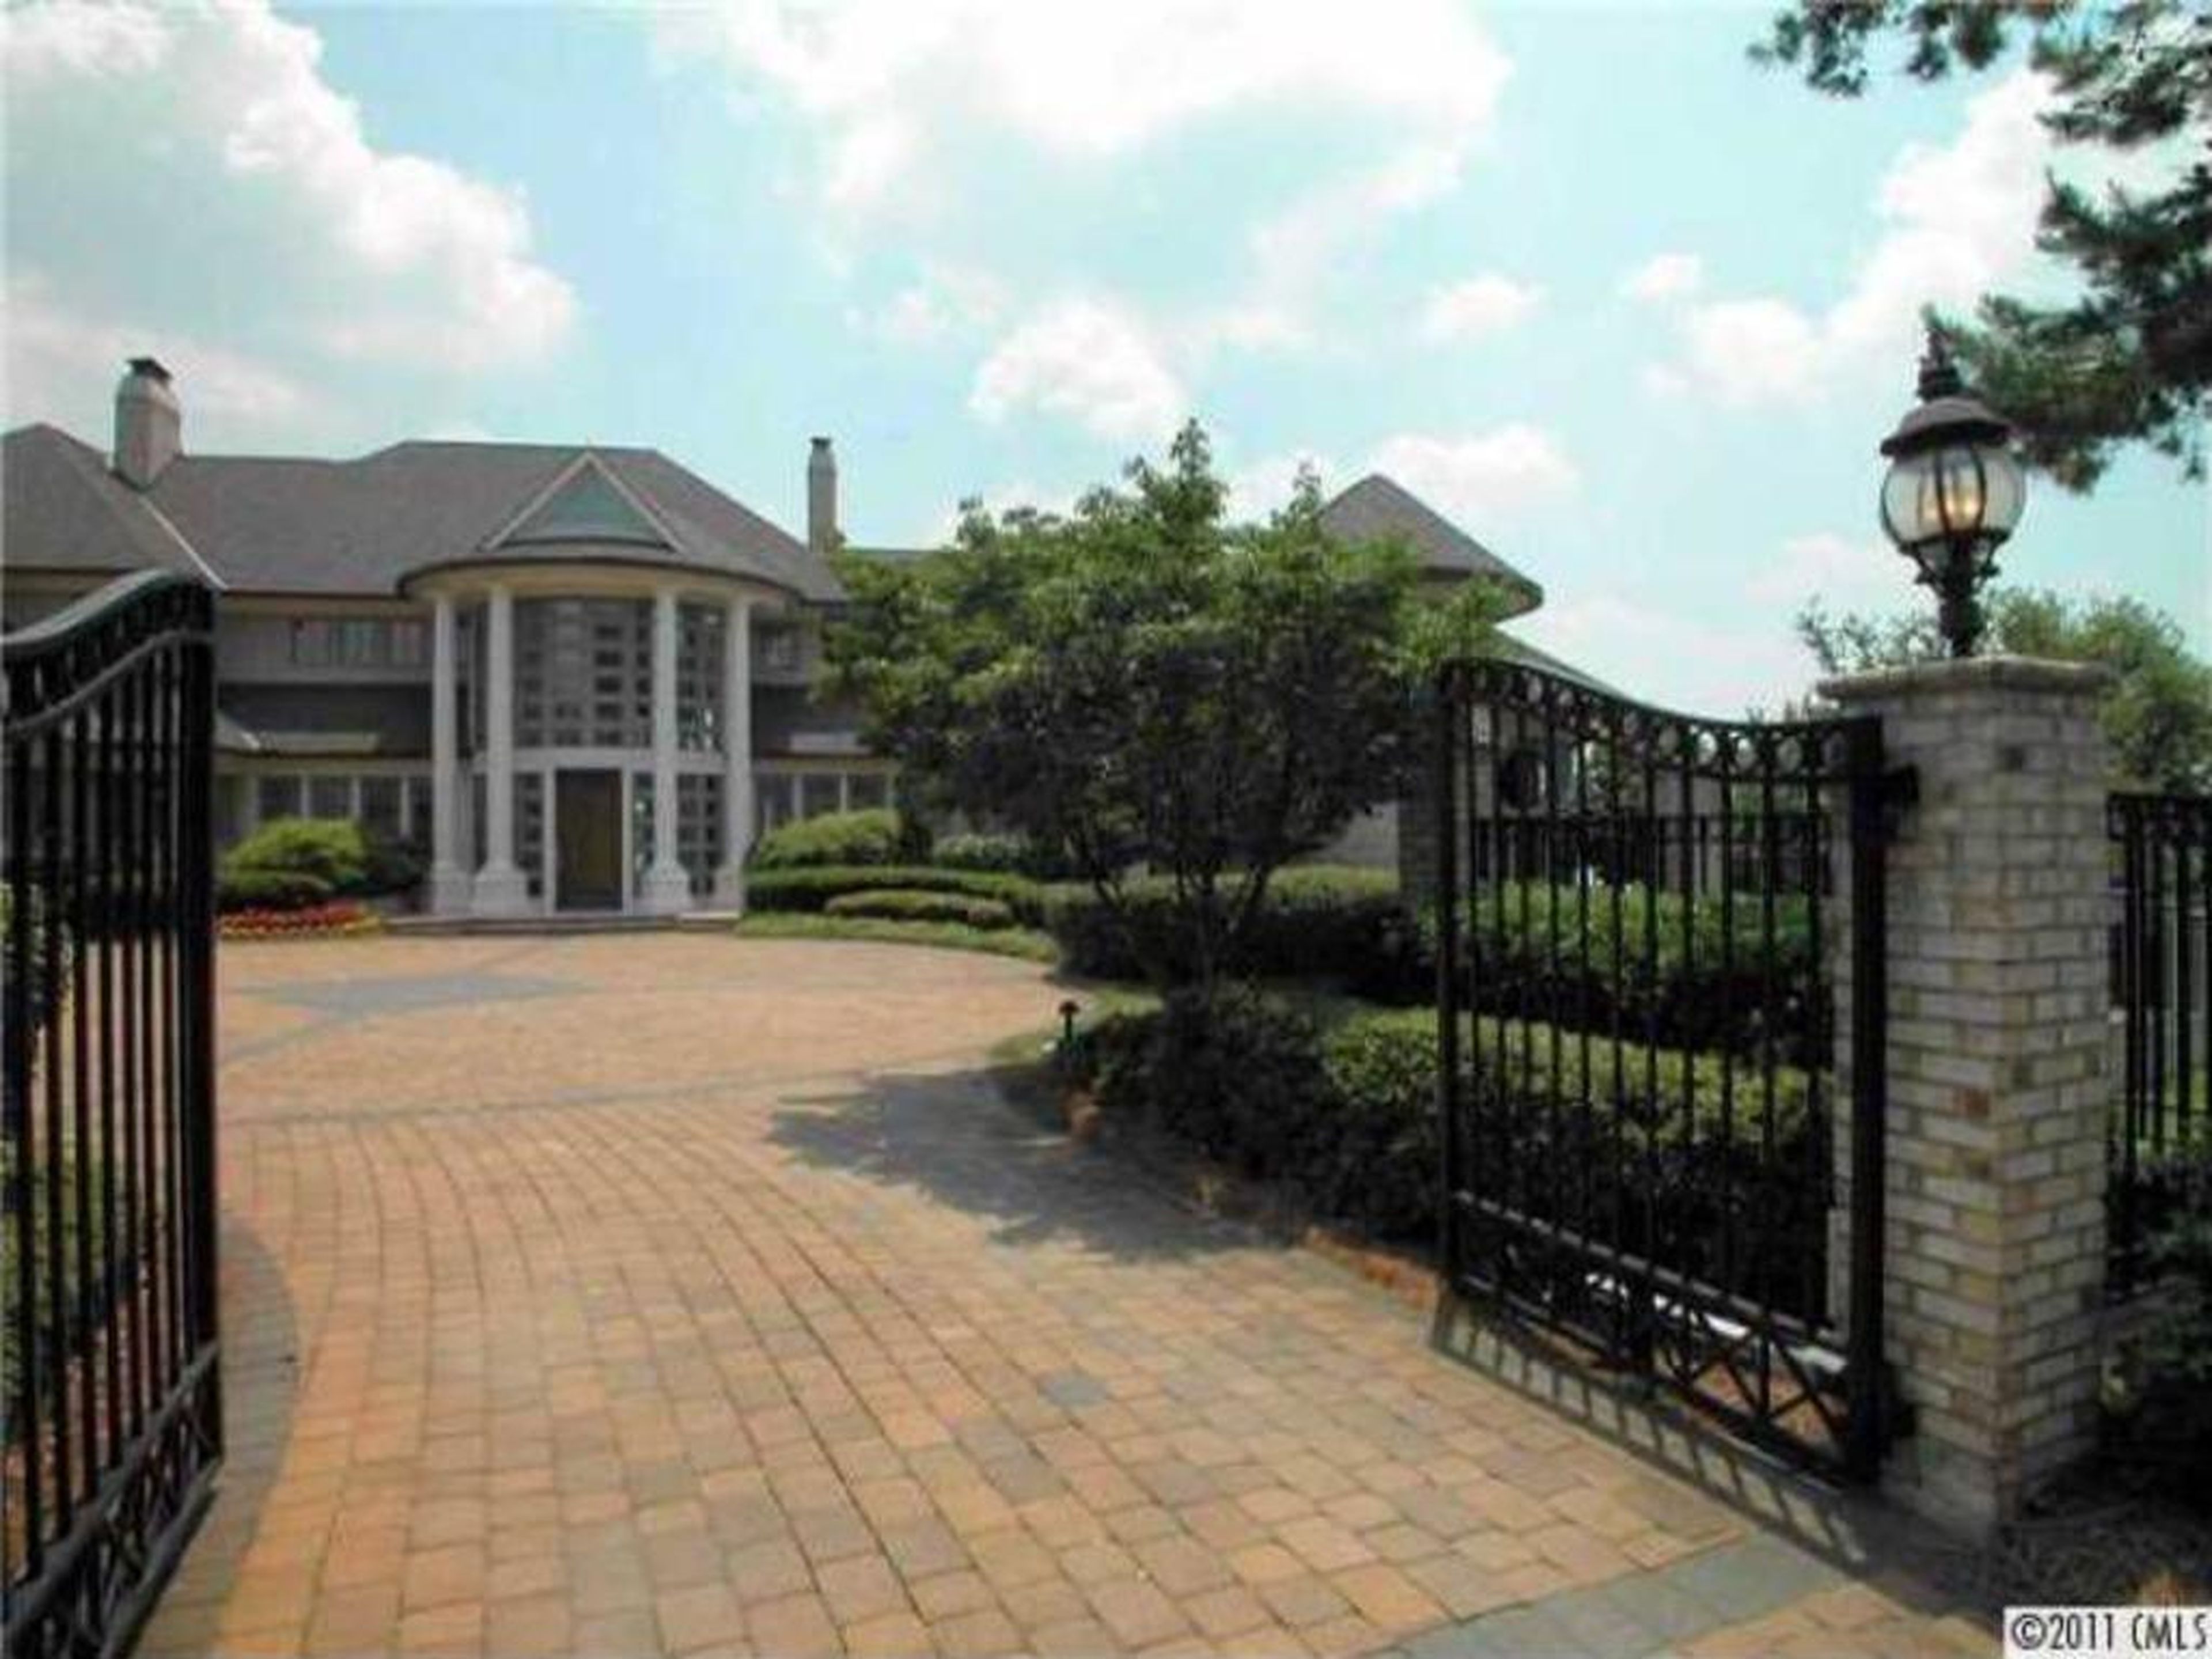 The house is in Cornelius, about a 30-minute drive from the Charlotte Hornets' arena — Jordan owns the NBA team. MJ purchased the house for $2.8 million after it was originally listed for $4 million.